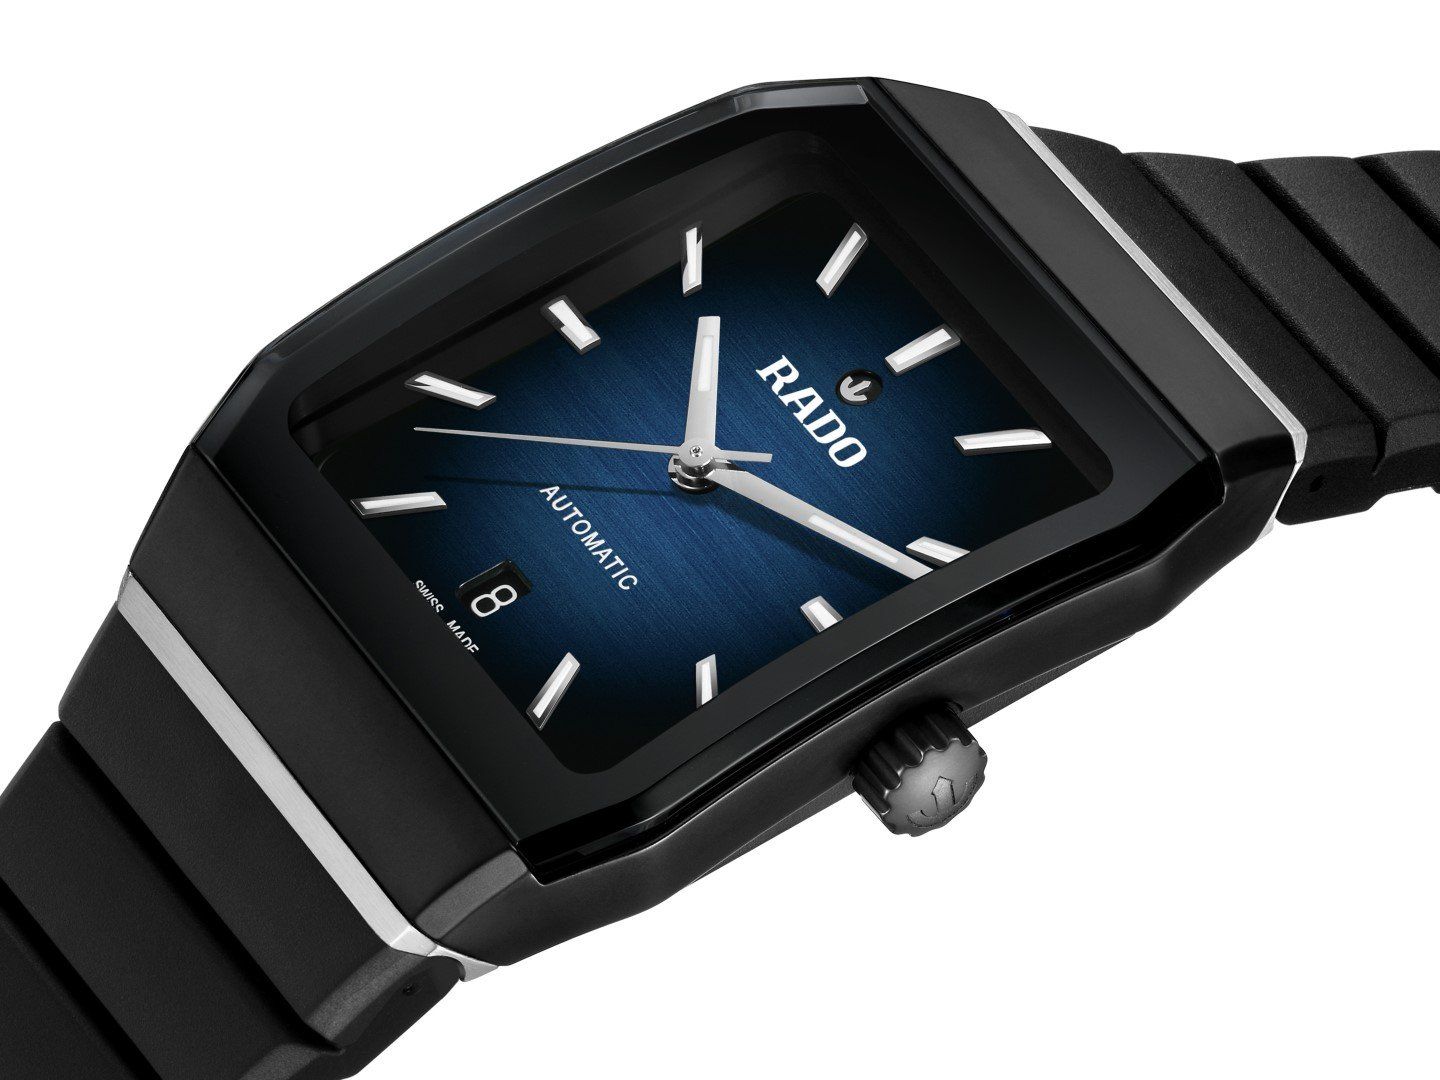 The timepiece is crafted from a case which features a high-tech ceramic bezel in matte black